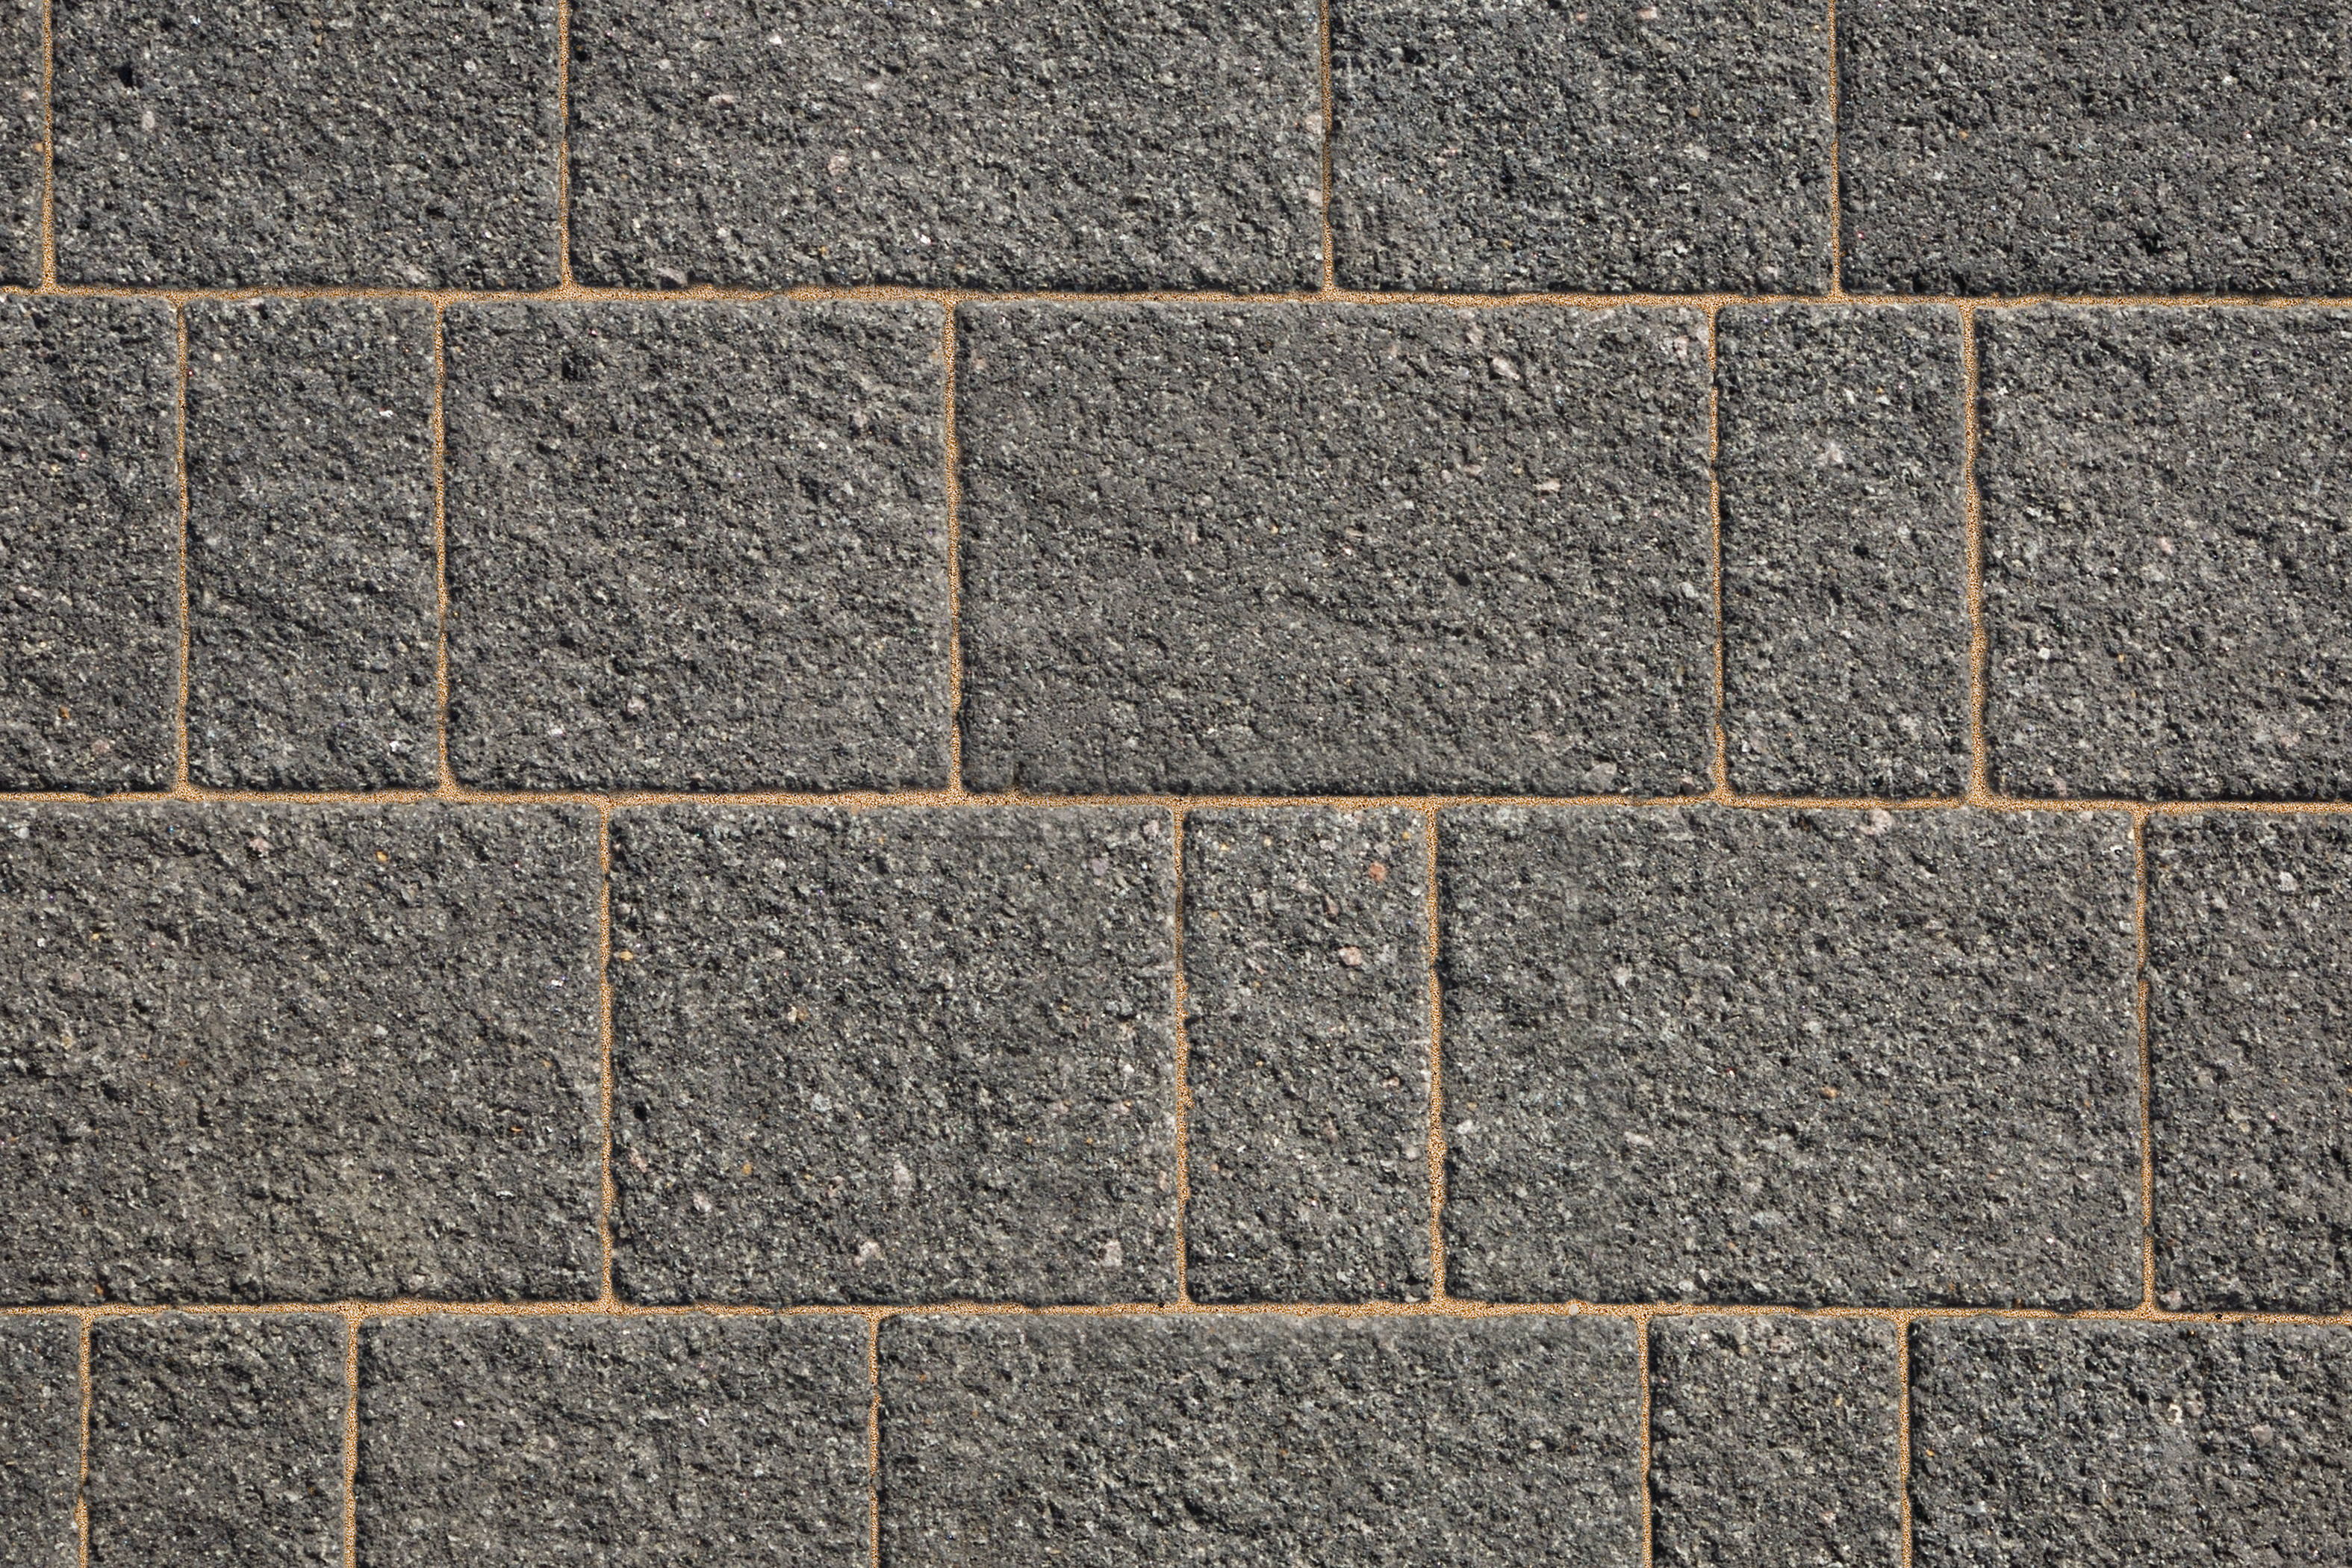 Image of Marshalls Argent Block Mixed Size Paving Driveway Pack Graphite - Sample